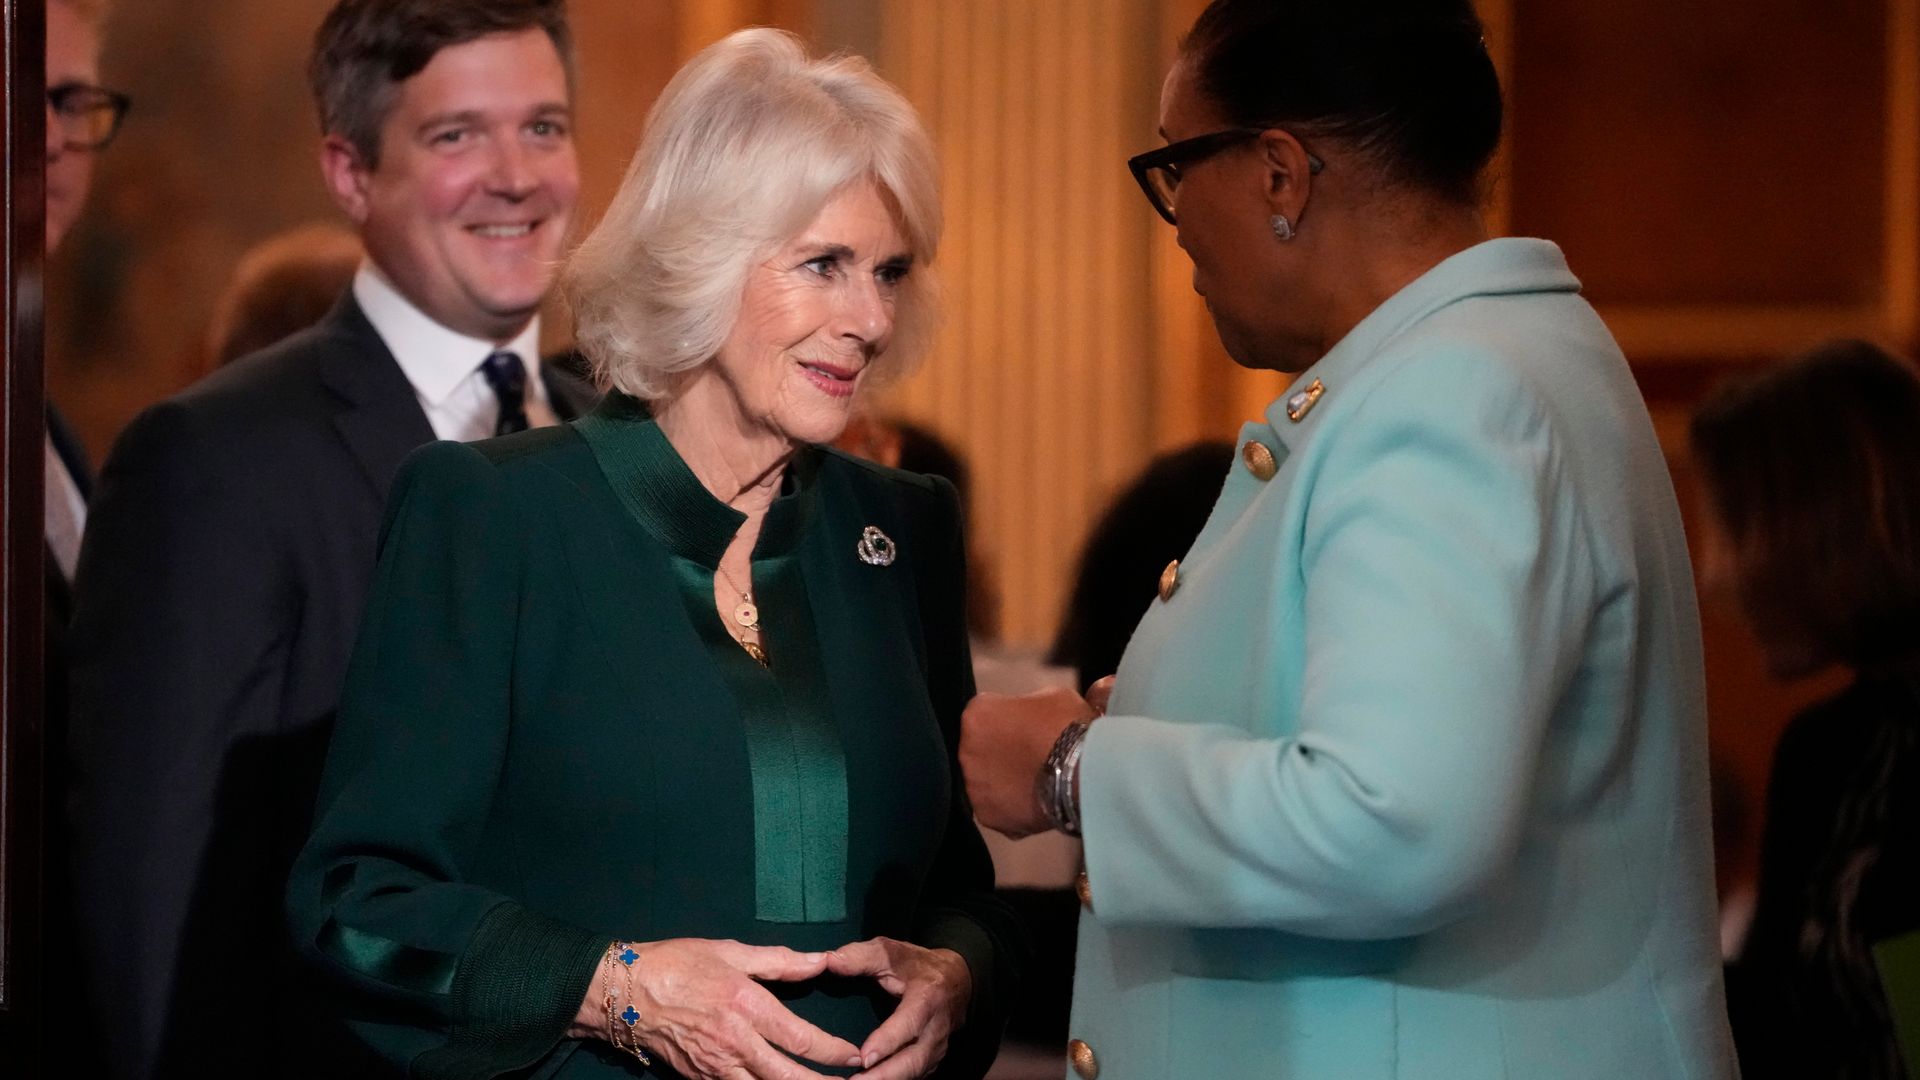 Queen Camilla, 76, is a vision in green as she meets women leaders at domestic violence event